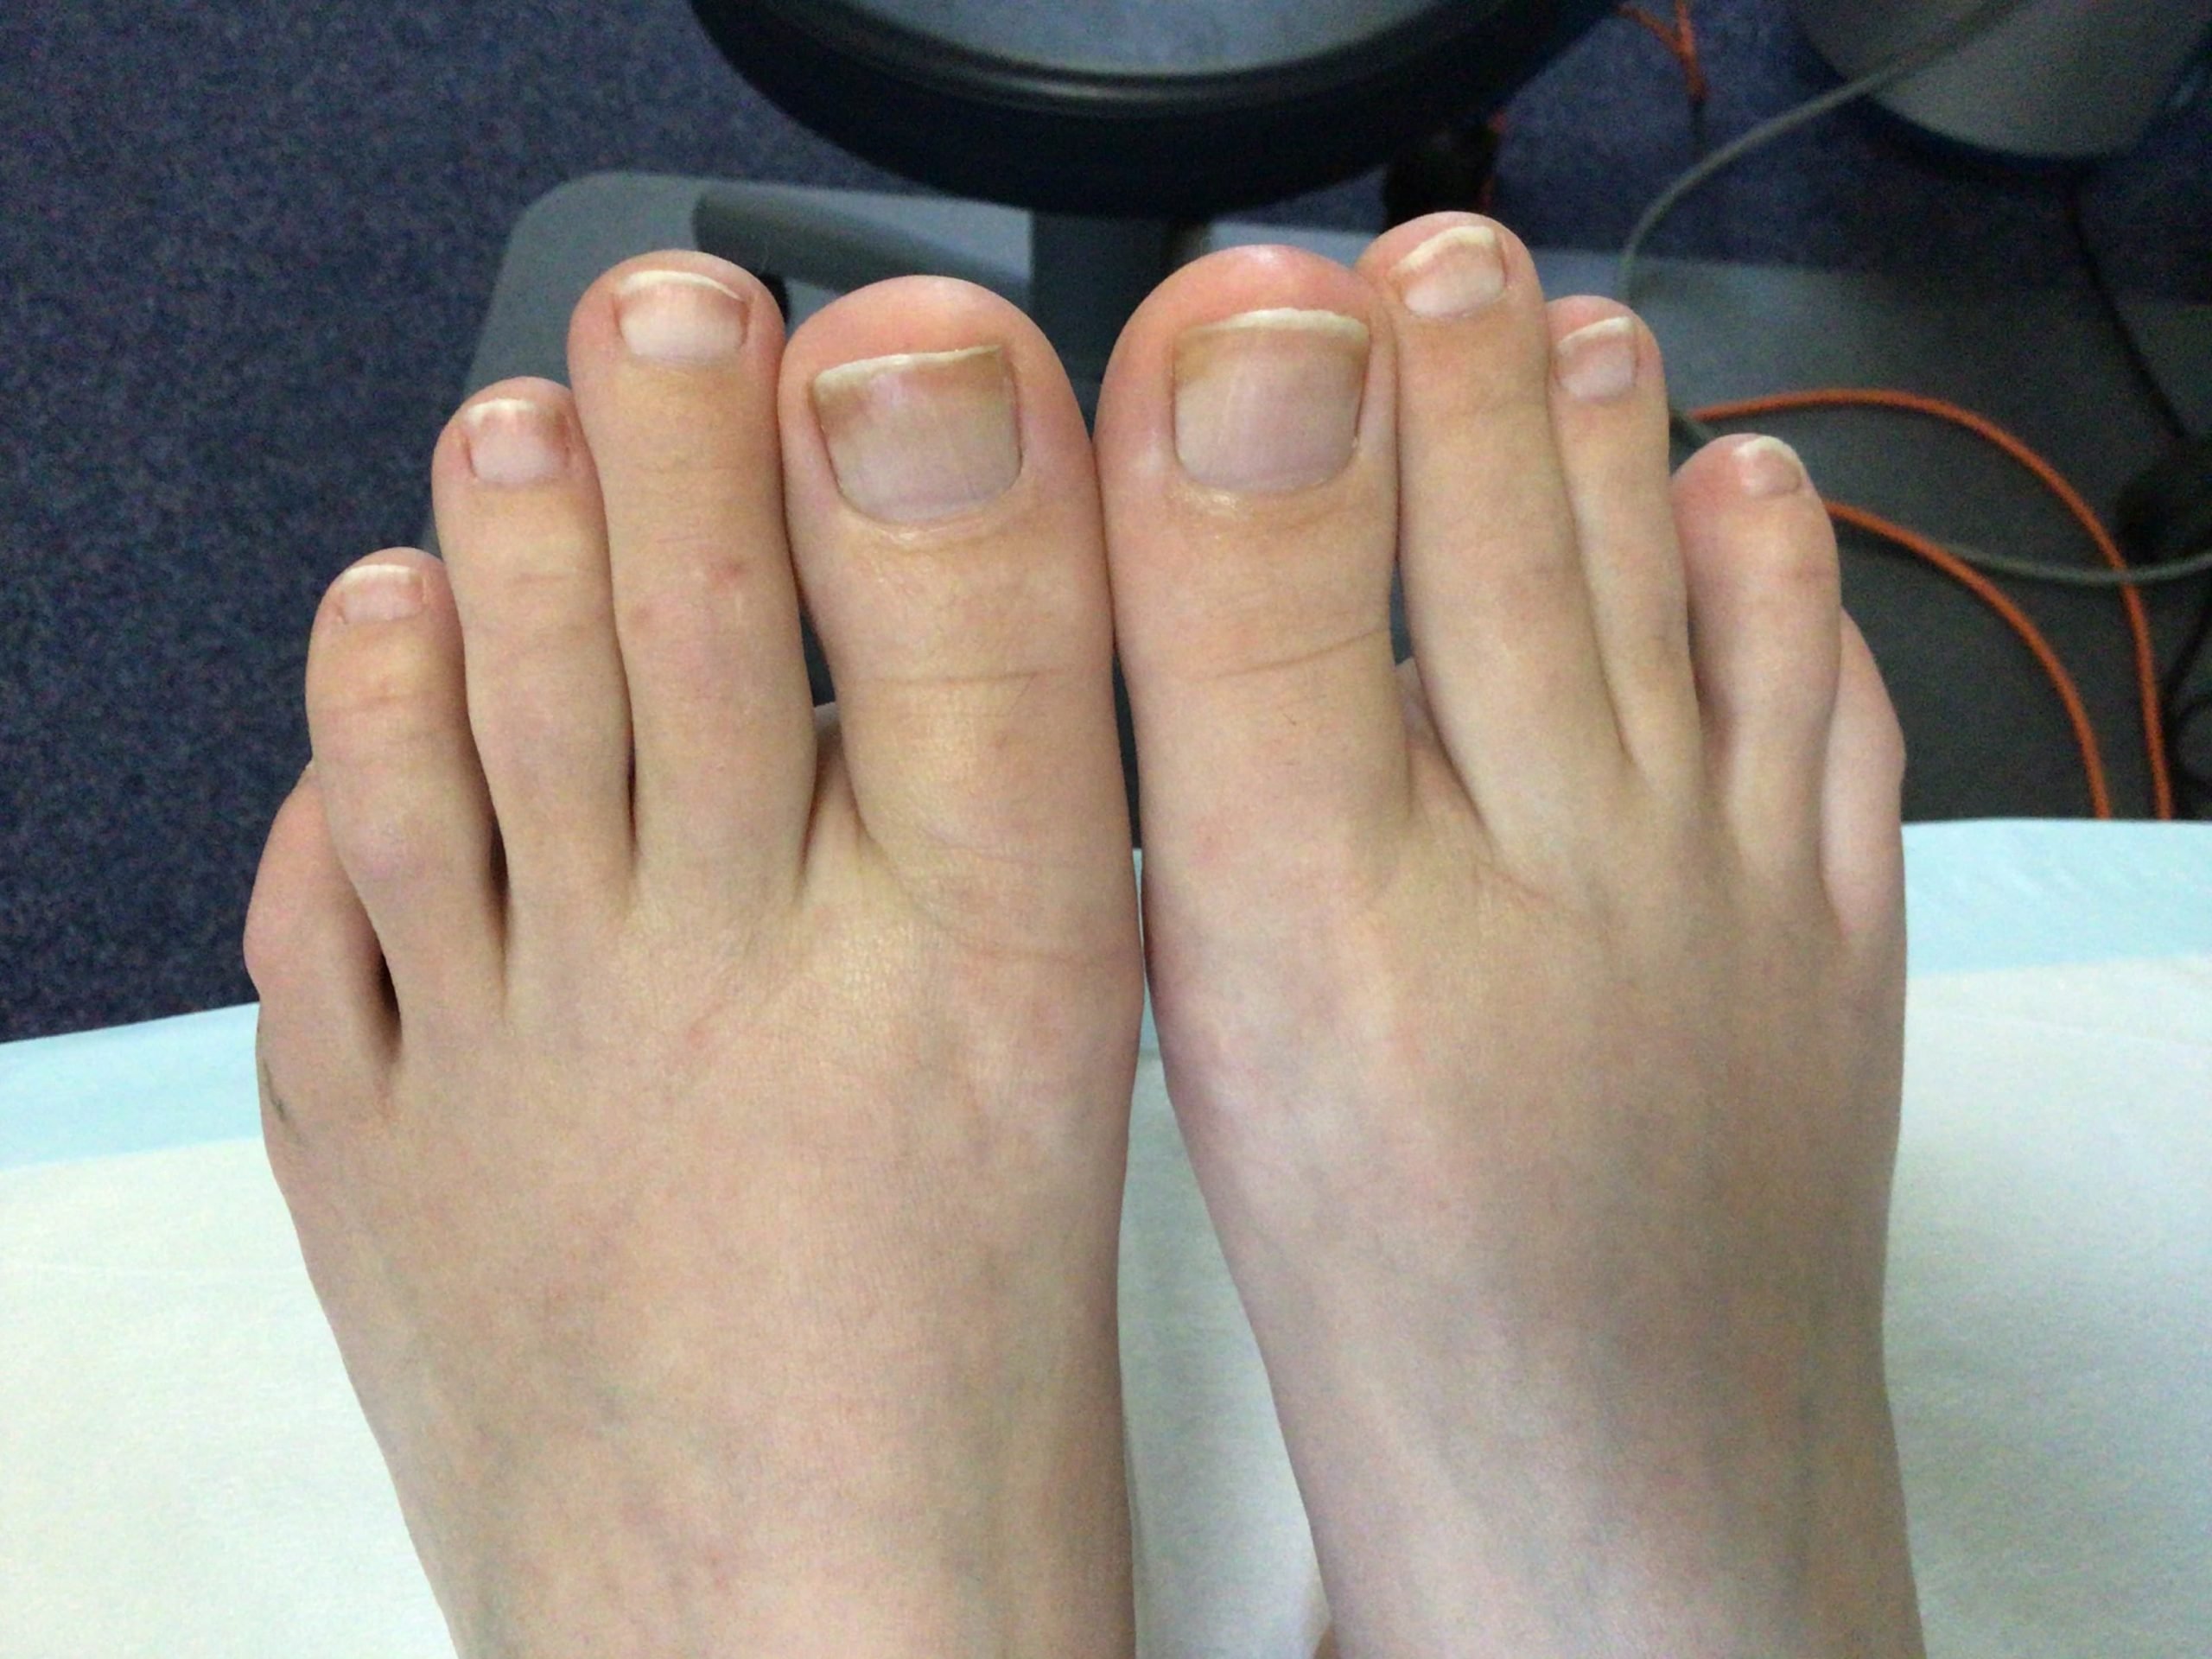 How do I get rid of my fungal nail infection?